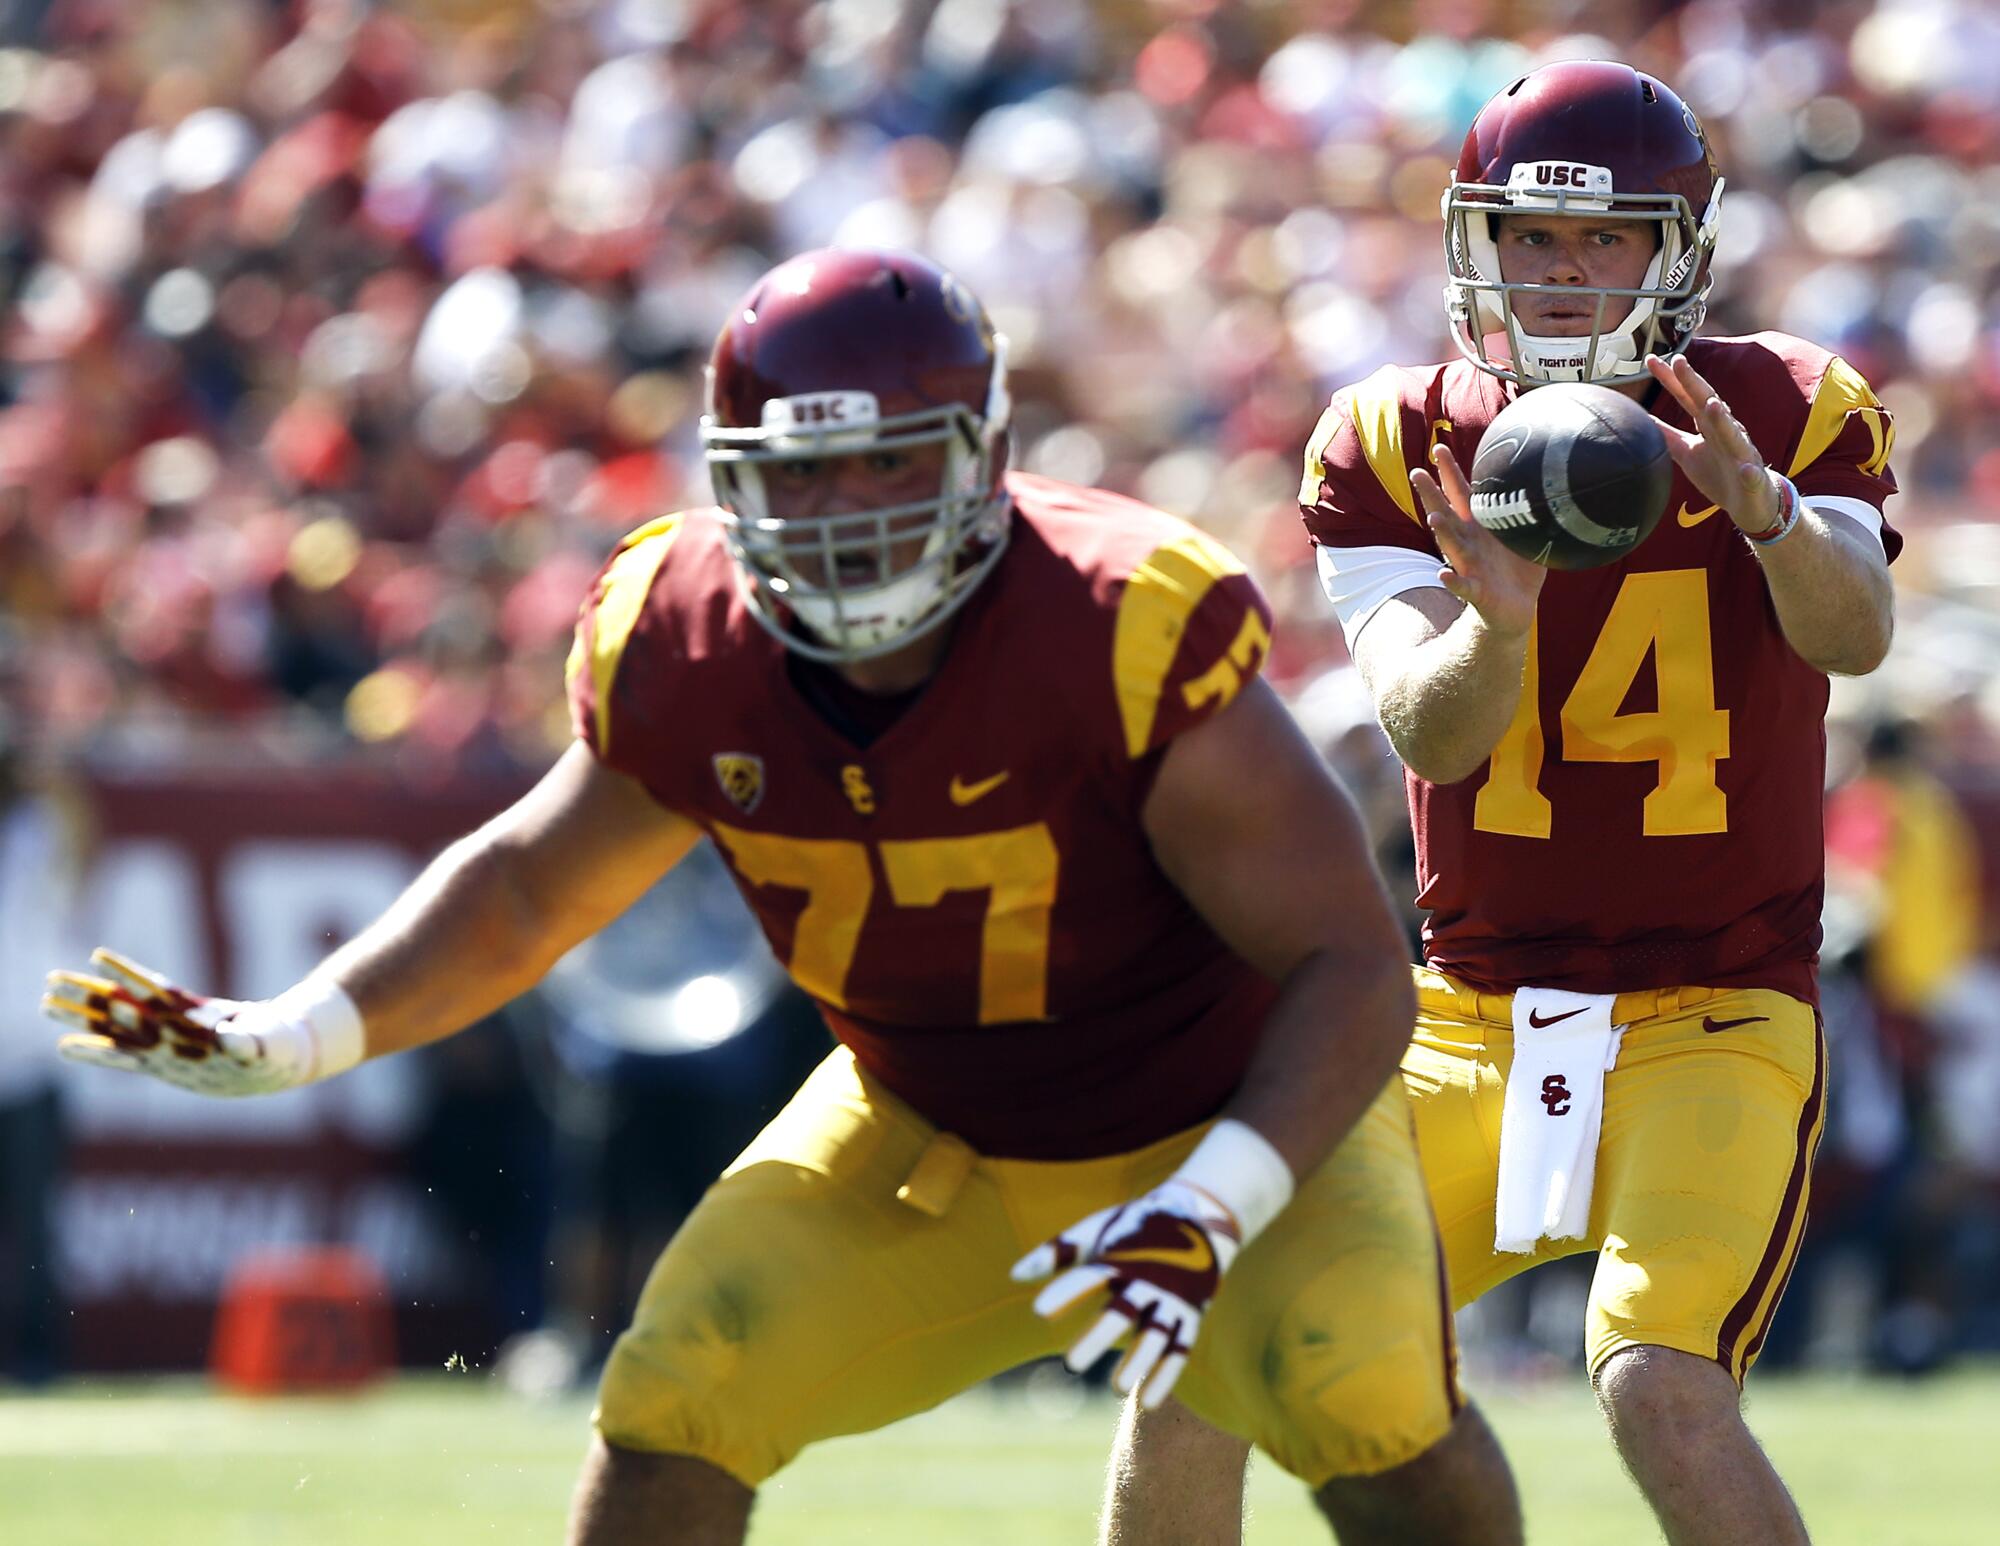 USC guard Chris Brown protects quarterback Sam Darnold during a game